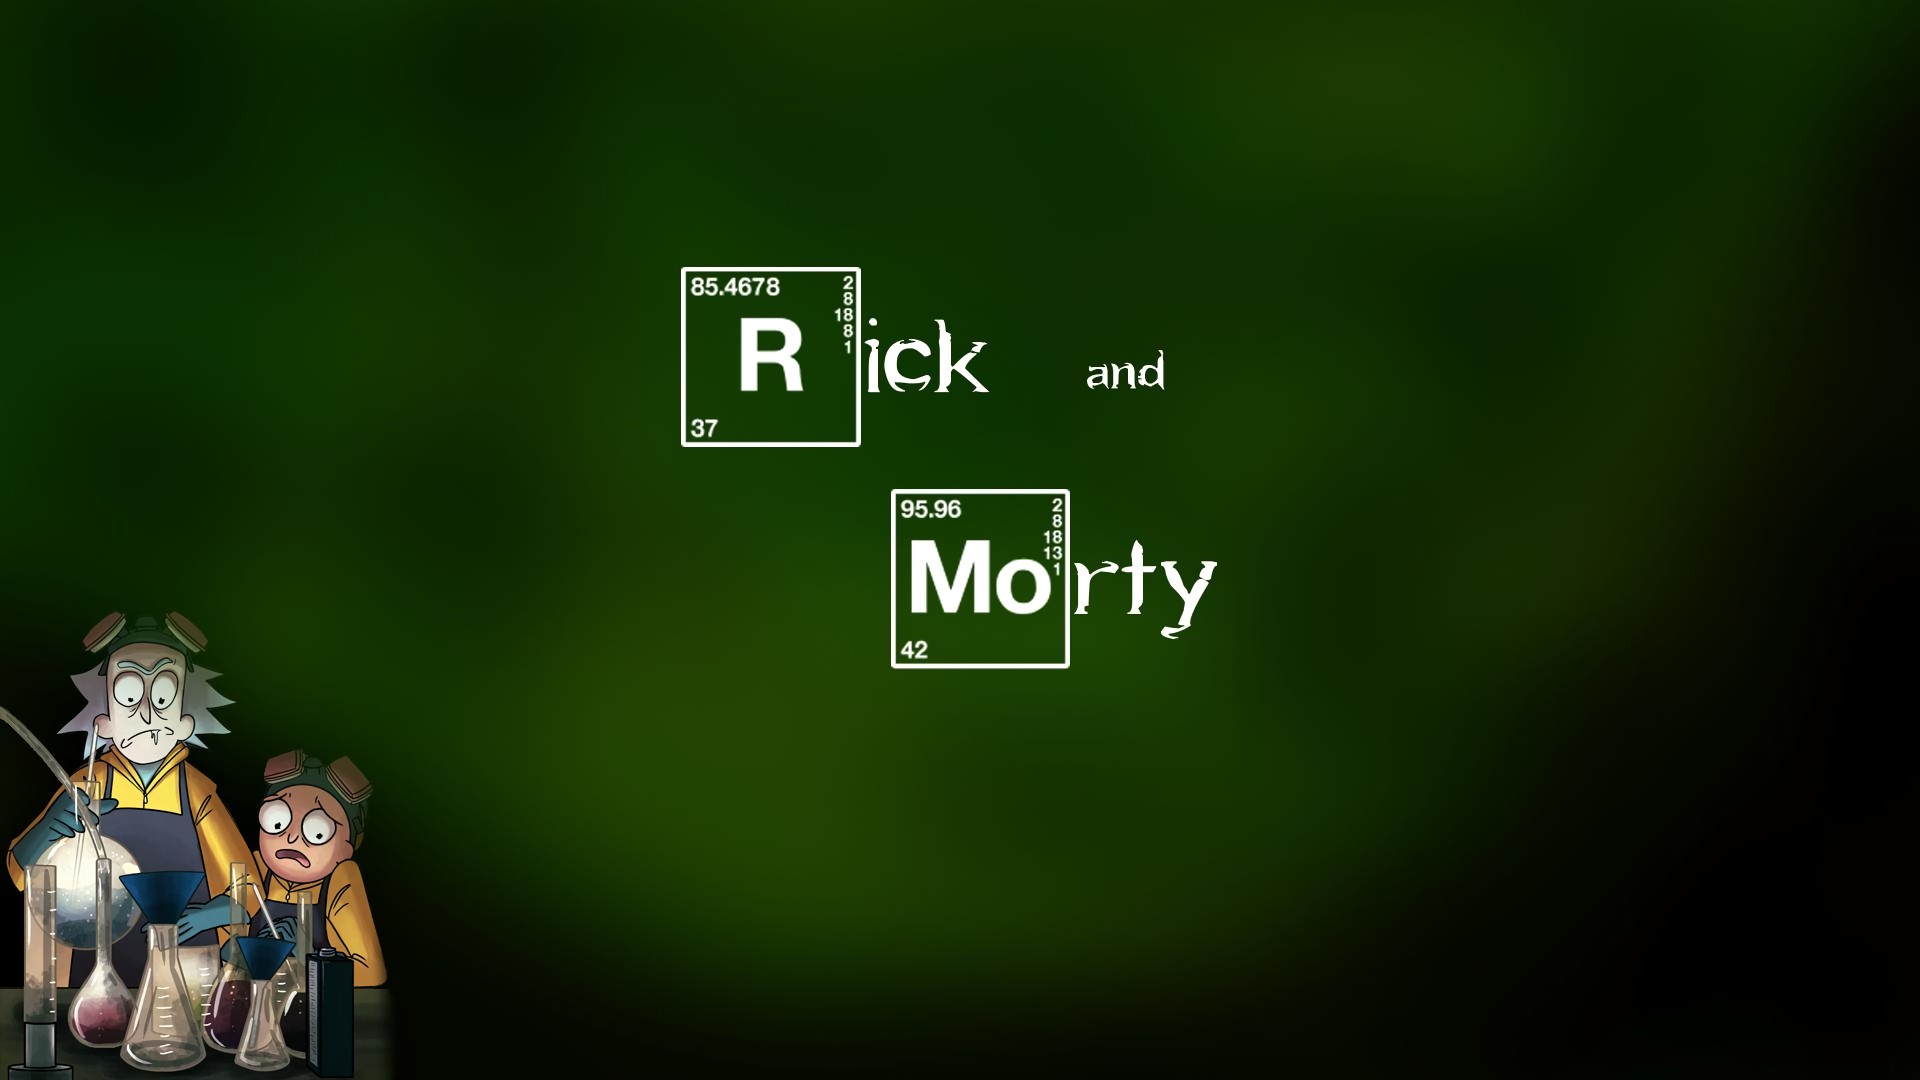 Wallpaper Rick n Morty Desktop with image resolution 1920x1080 pixel. You can use this wallpaper as background for your desktop Computer Screensavers, Android or iPhone smartphones